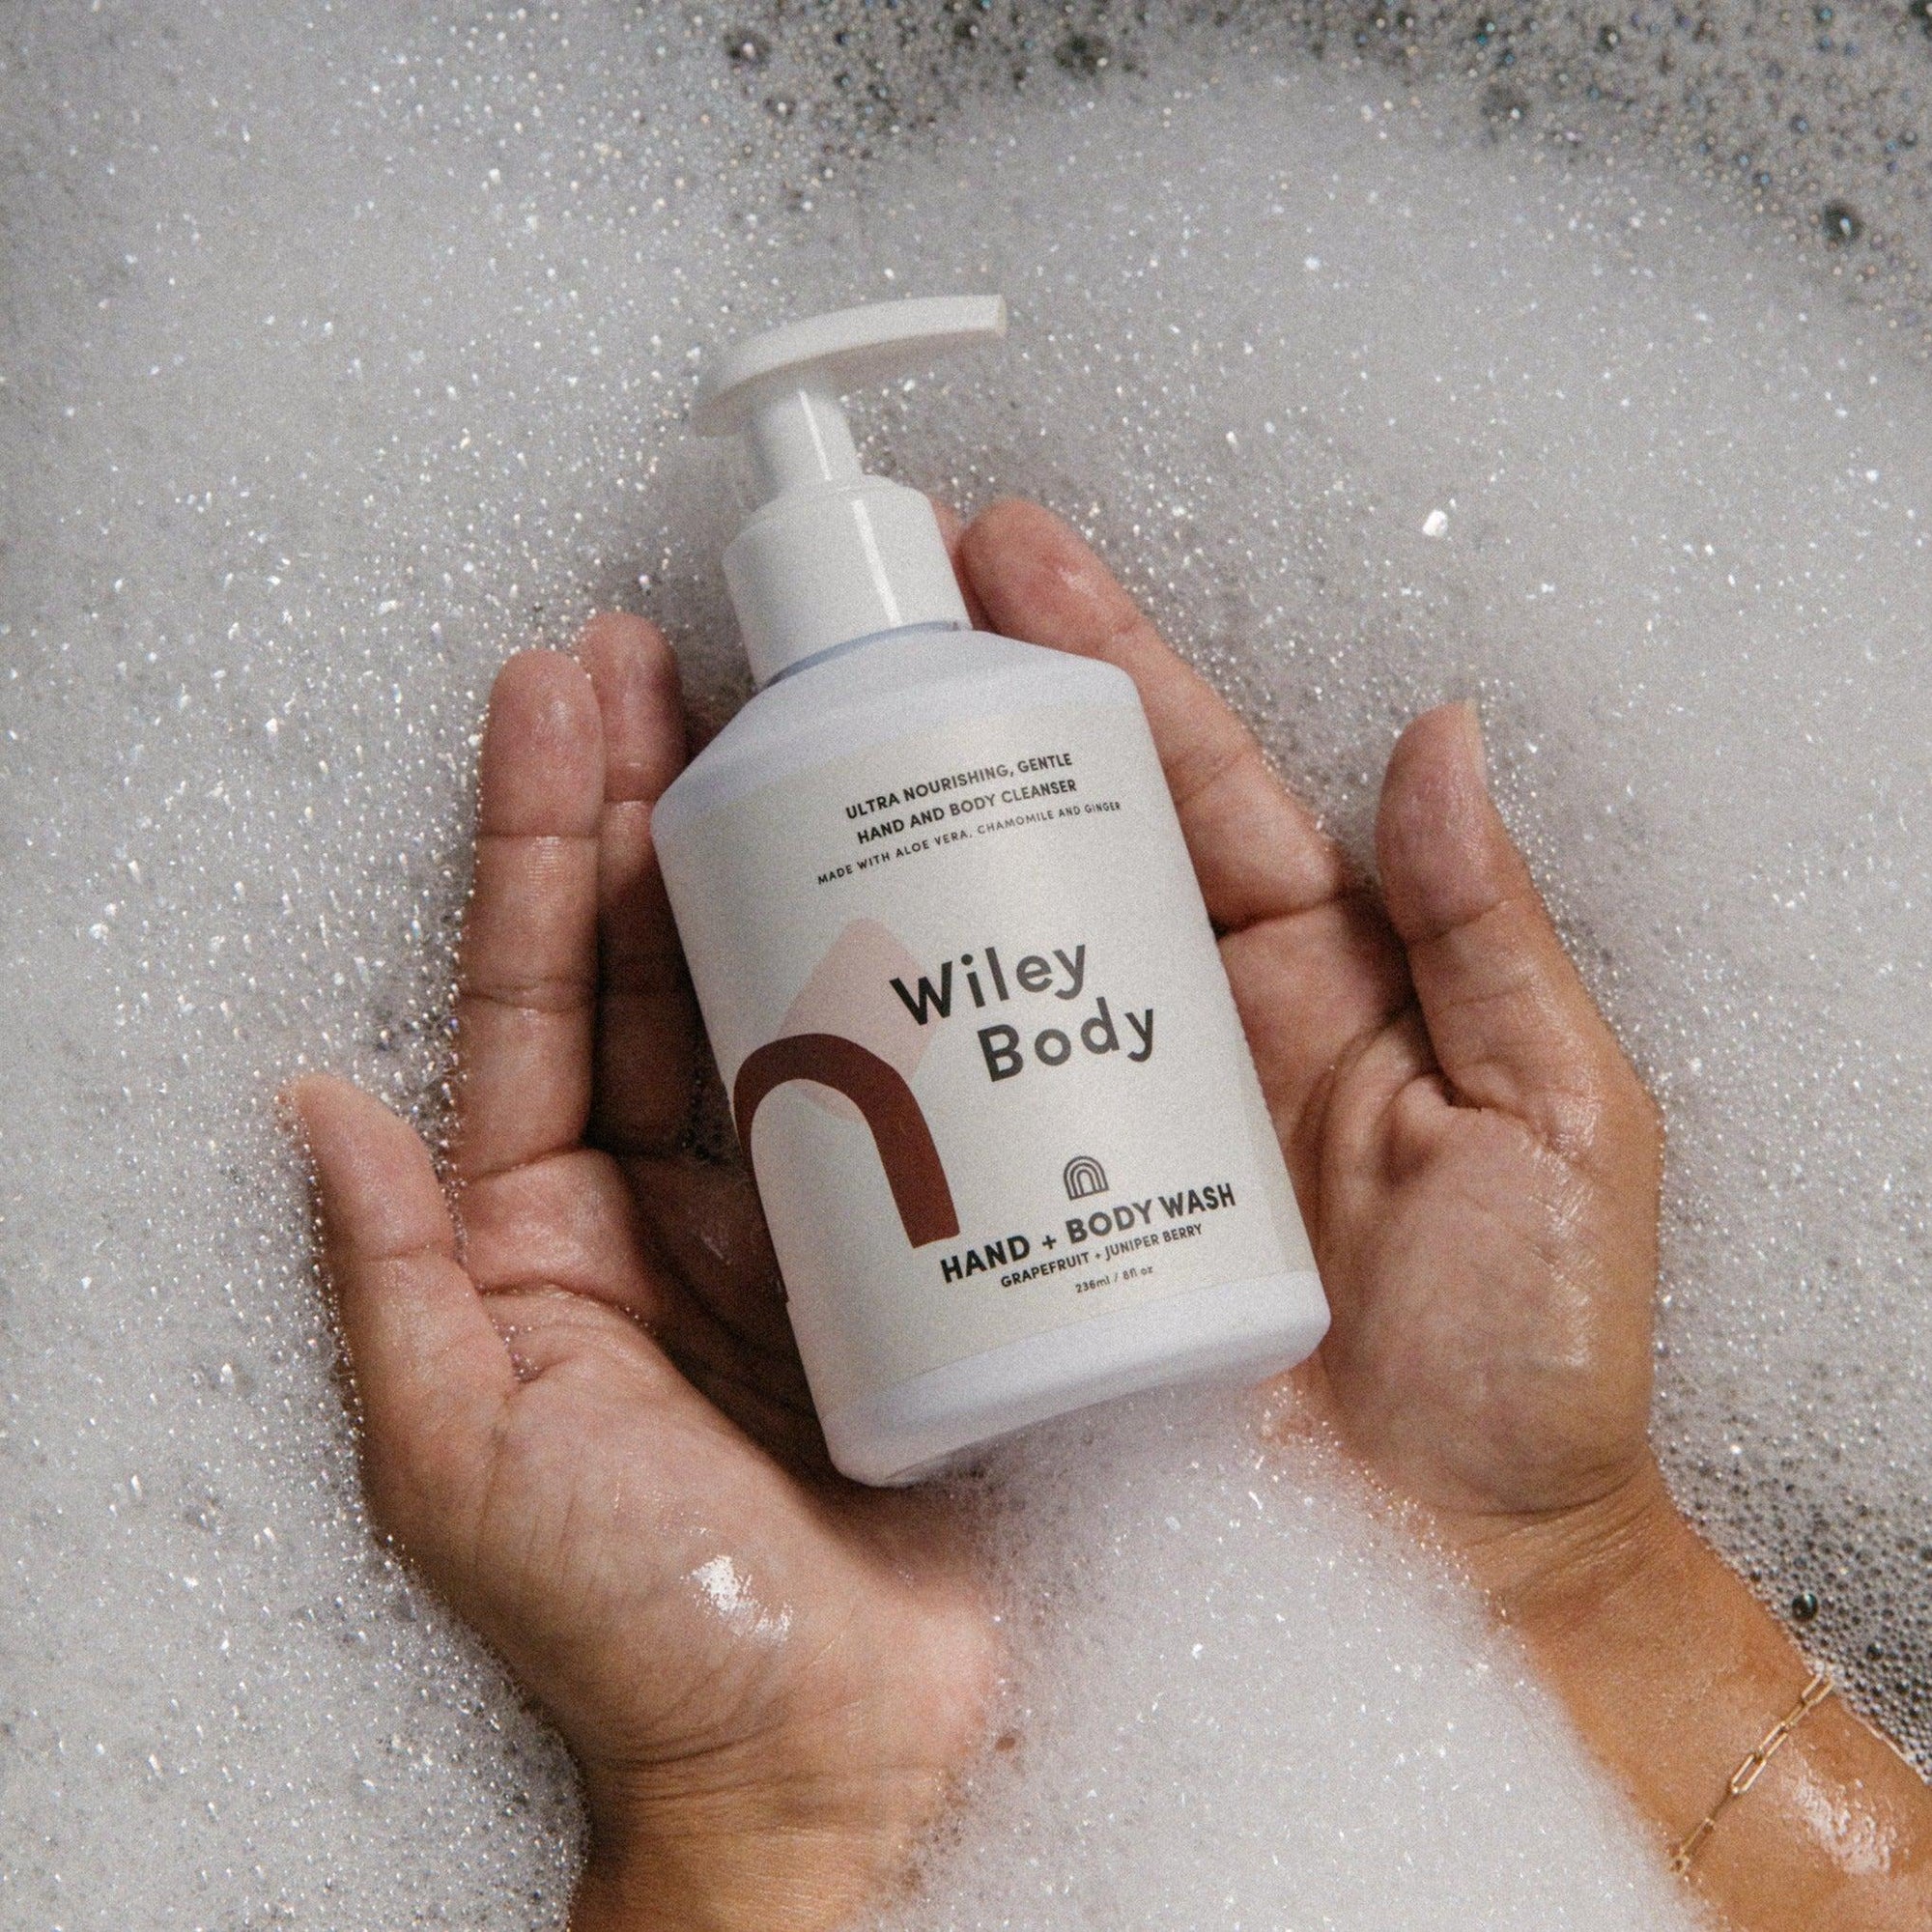 A person holding a bottle of Wiley Body organic whey body soap.